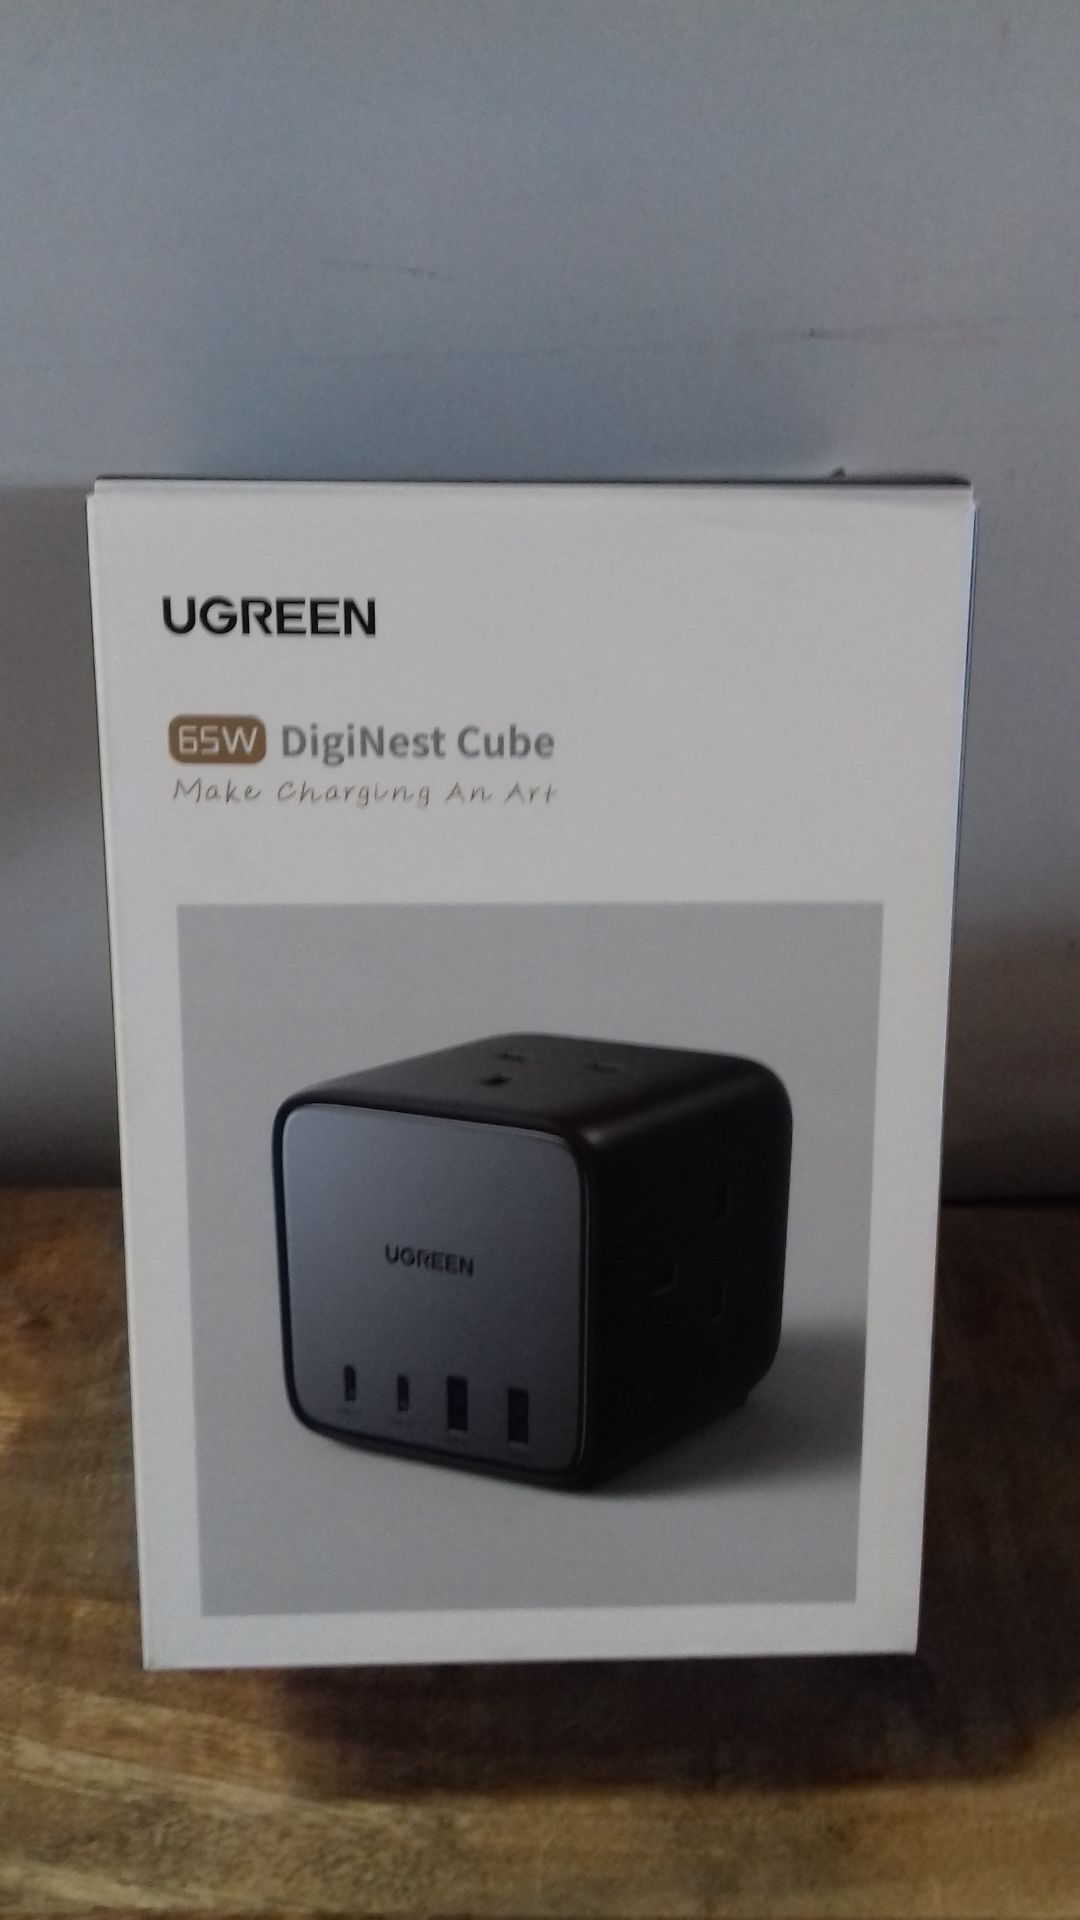 RRP £54.99 UGREEN 65W DigiNest Cube - Image 2 of 2